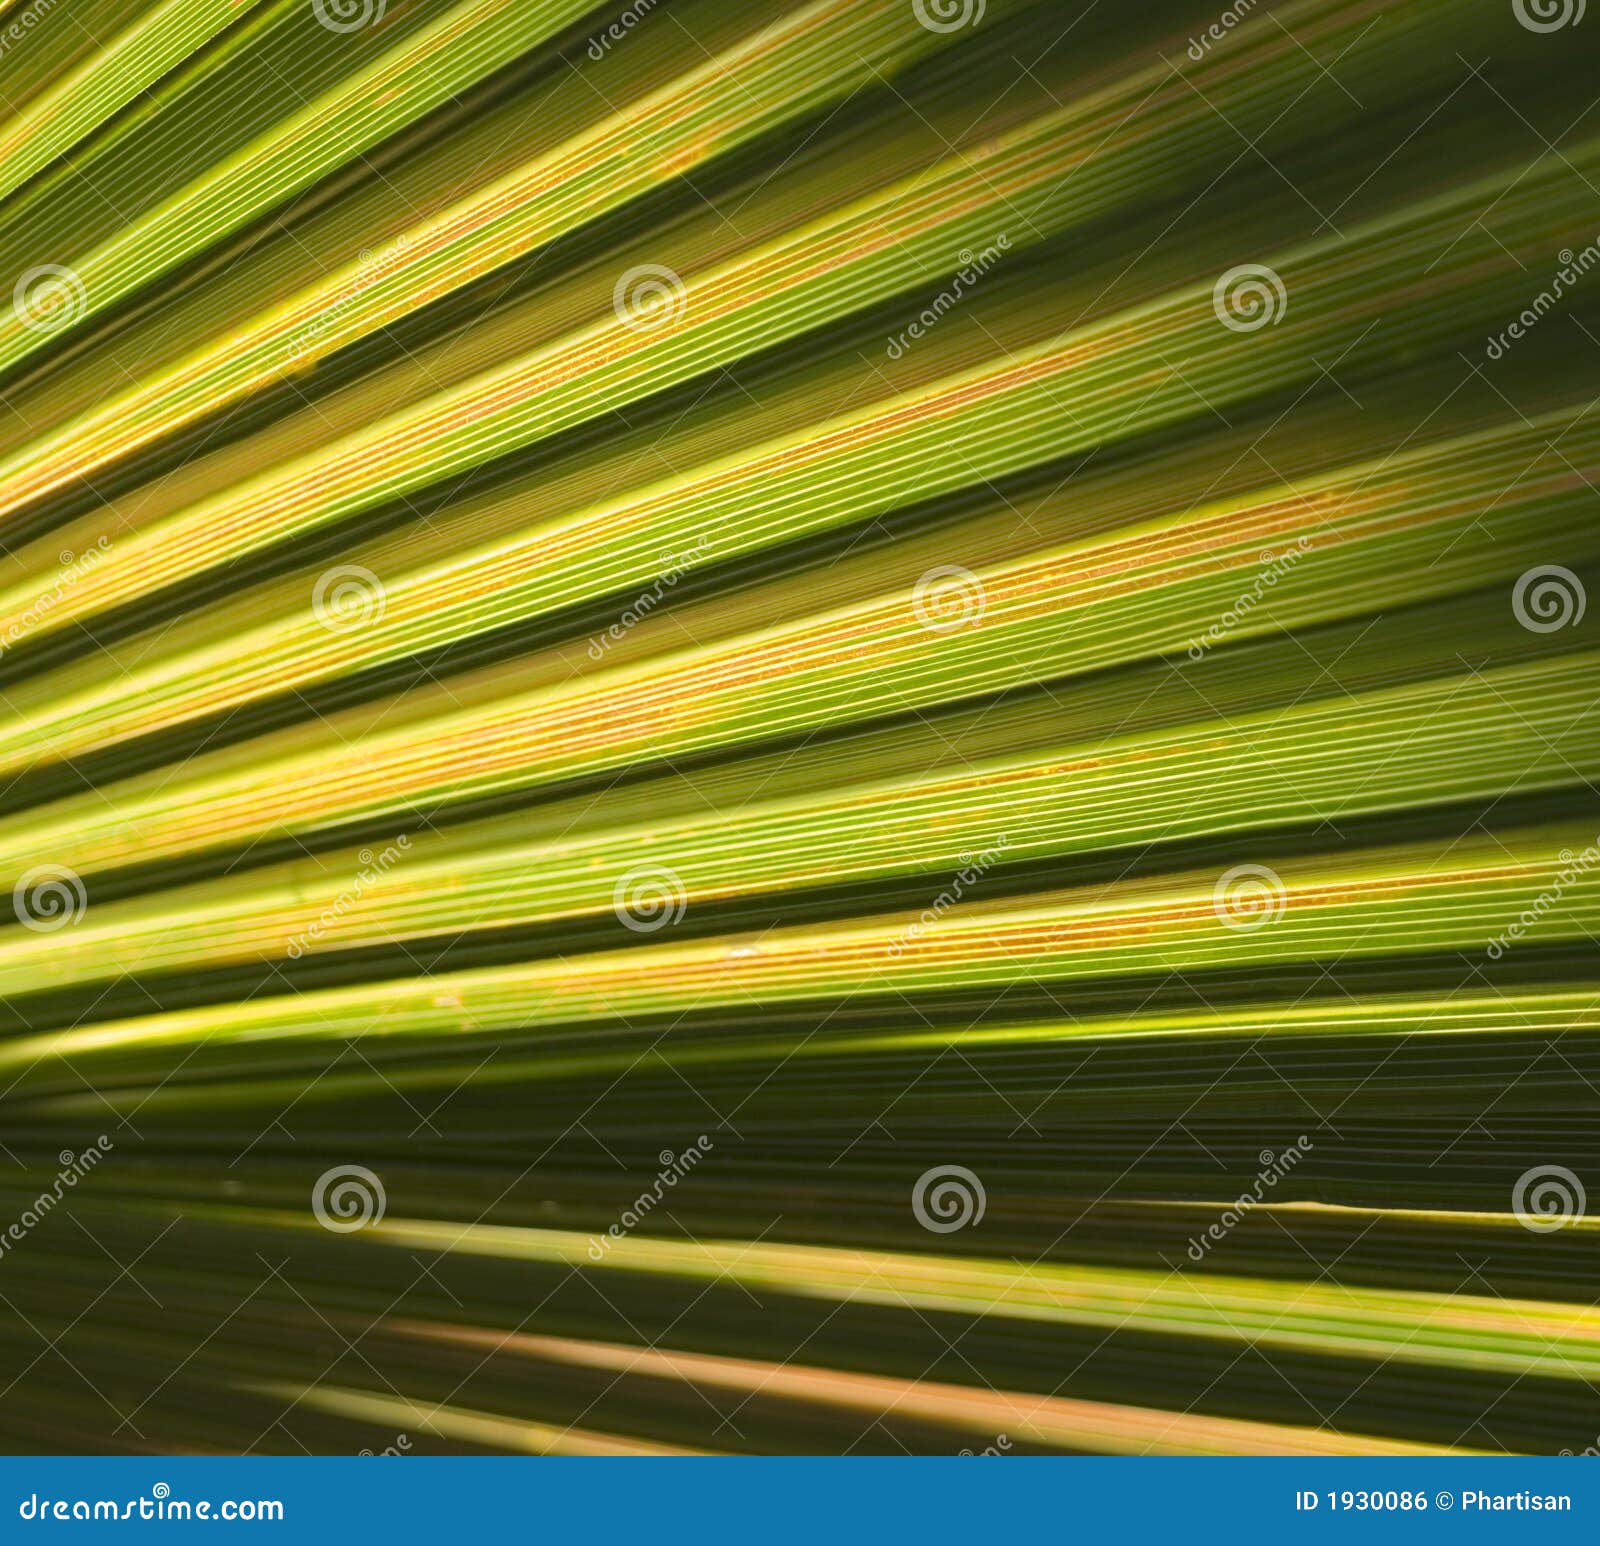 Abstract Palm Leaf Background Stock Photo - Image of backlight, pattern